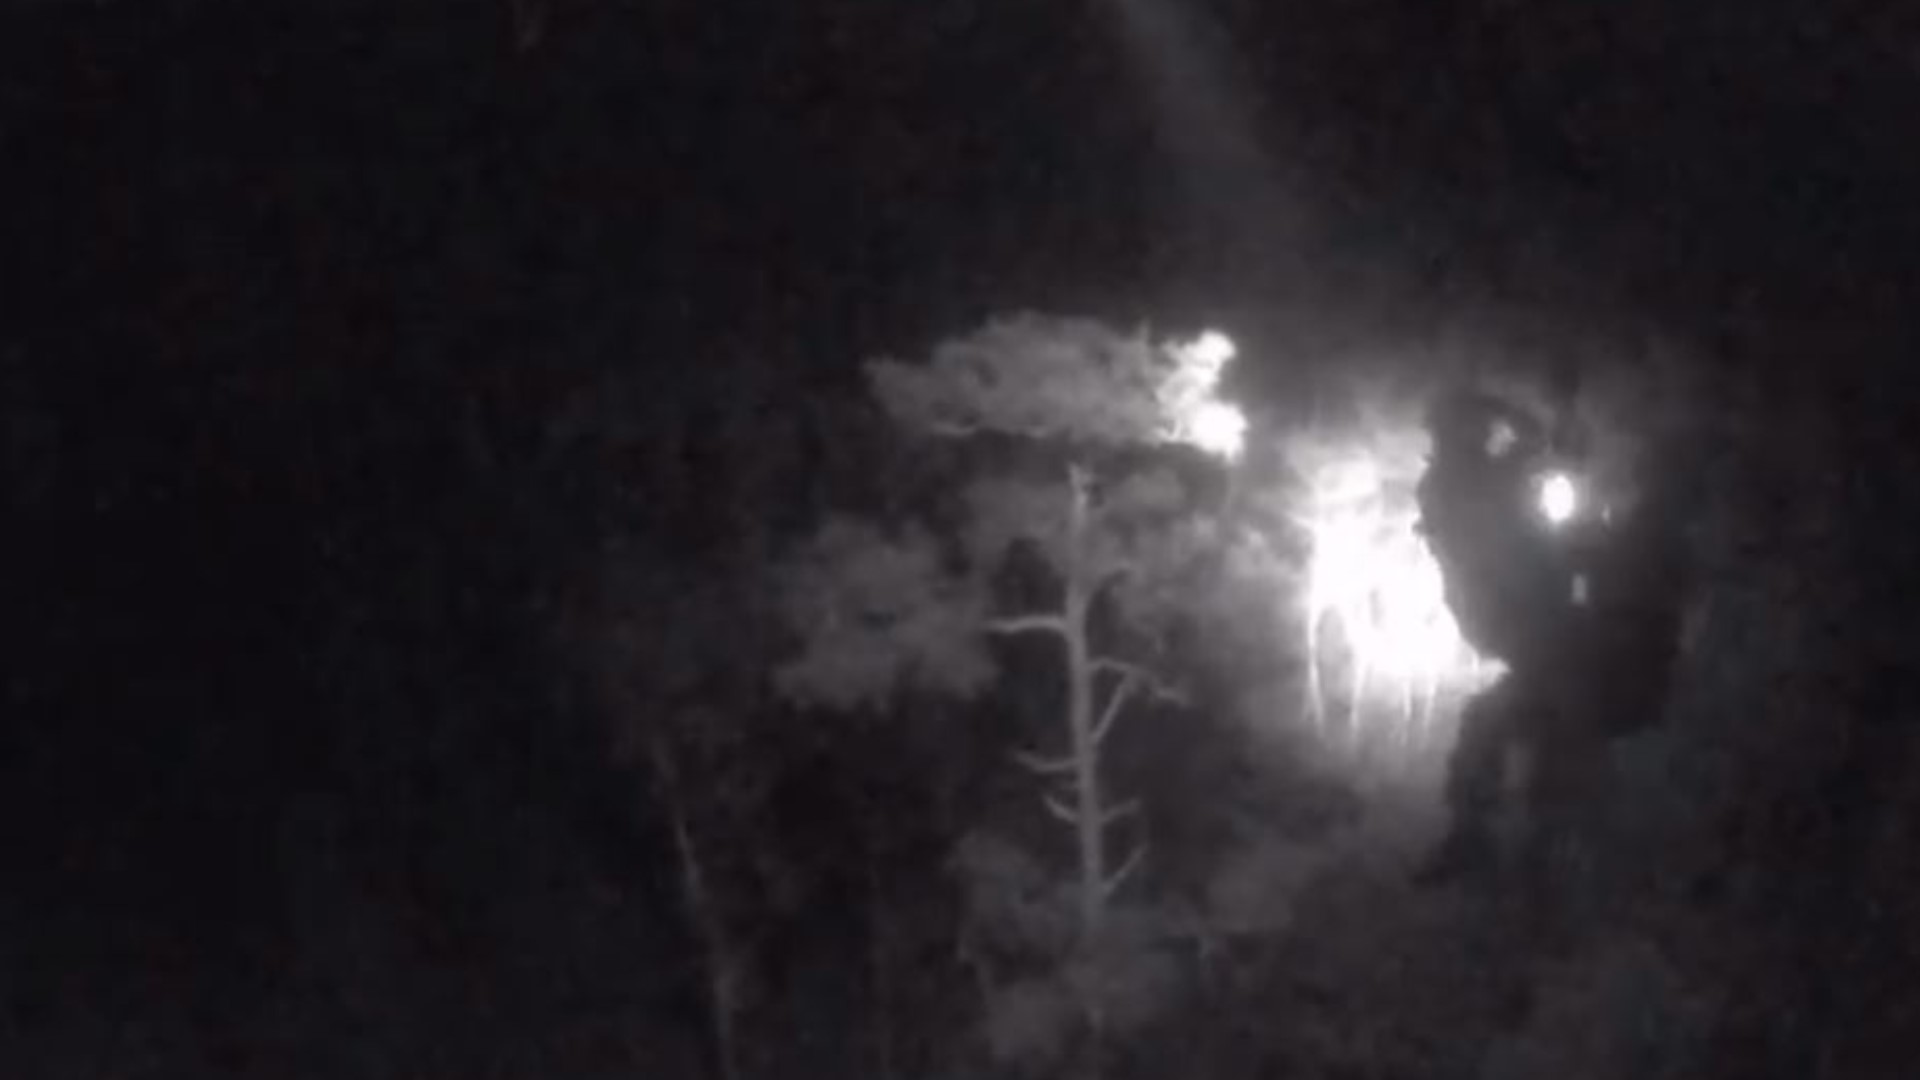 The Collier County Aviation Unit was called on for help rescuing a man in his 60s who was involved in an ATV crash Monday evening in the Everglades. Pilots used night vision goggles to find a man and his friends while Collier dispatchers helped navigate the helicopter based on the 911 call. https://on.wtsp.com/2IlSdvX